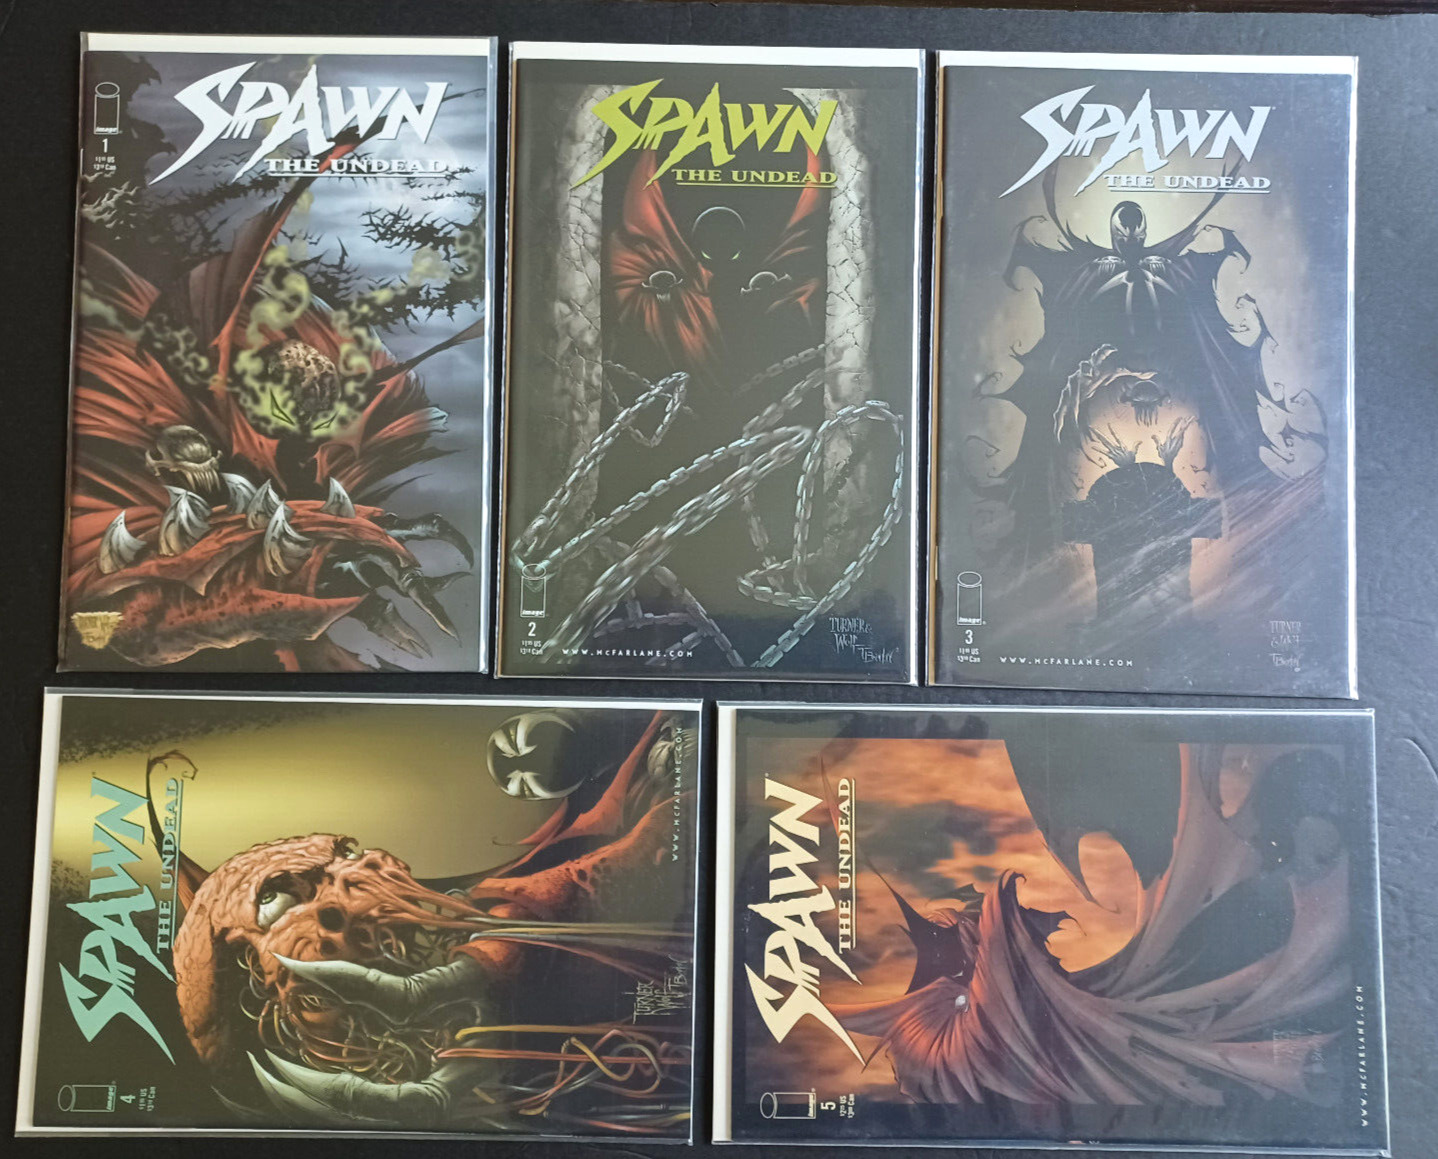 Spawn: The Undead #1-9 complete set - Todd McFarlane - Image - 1999 - NM